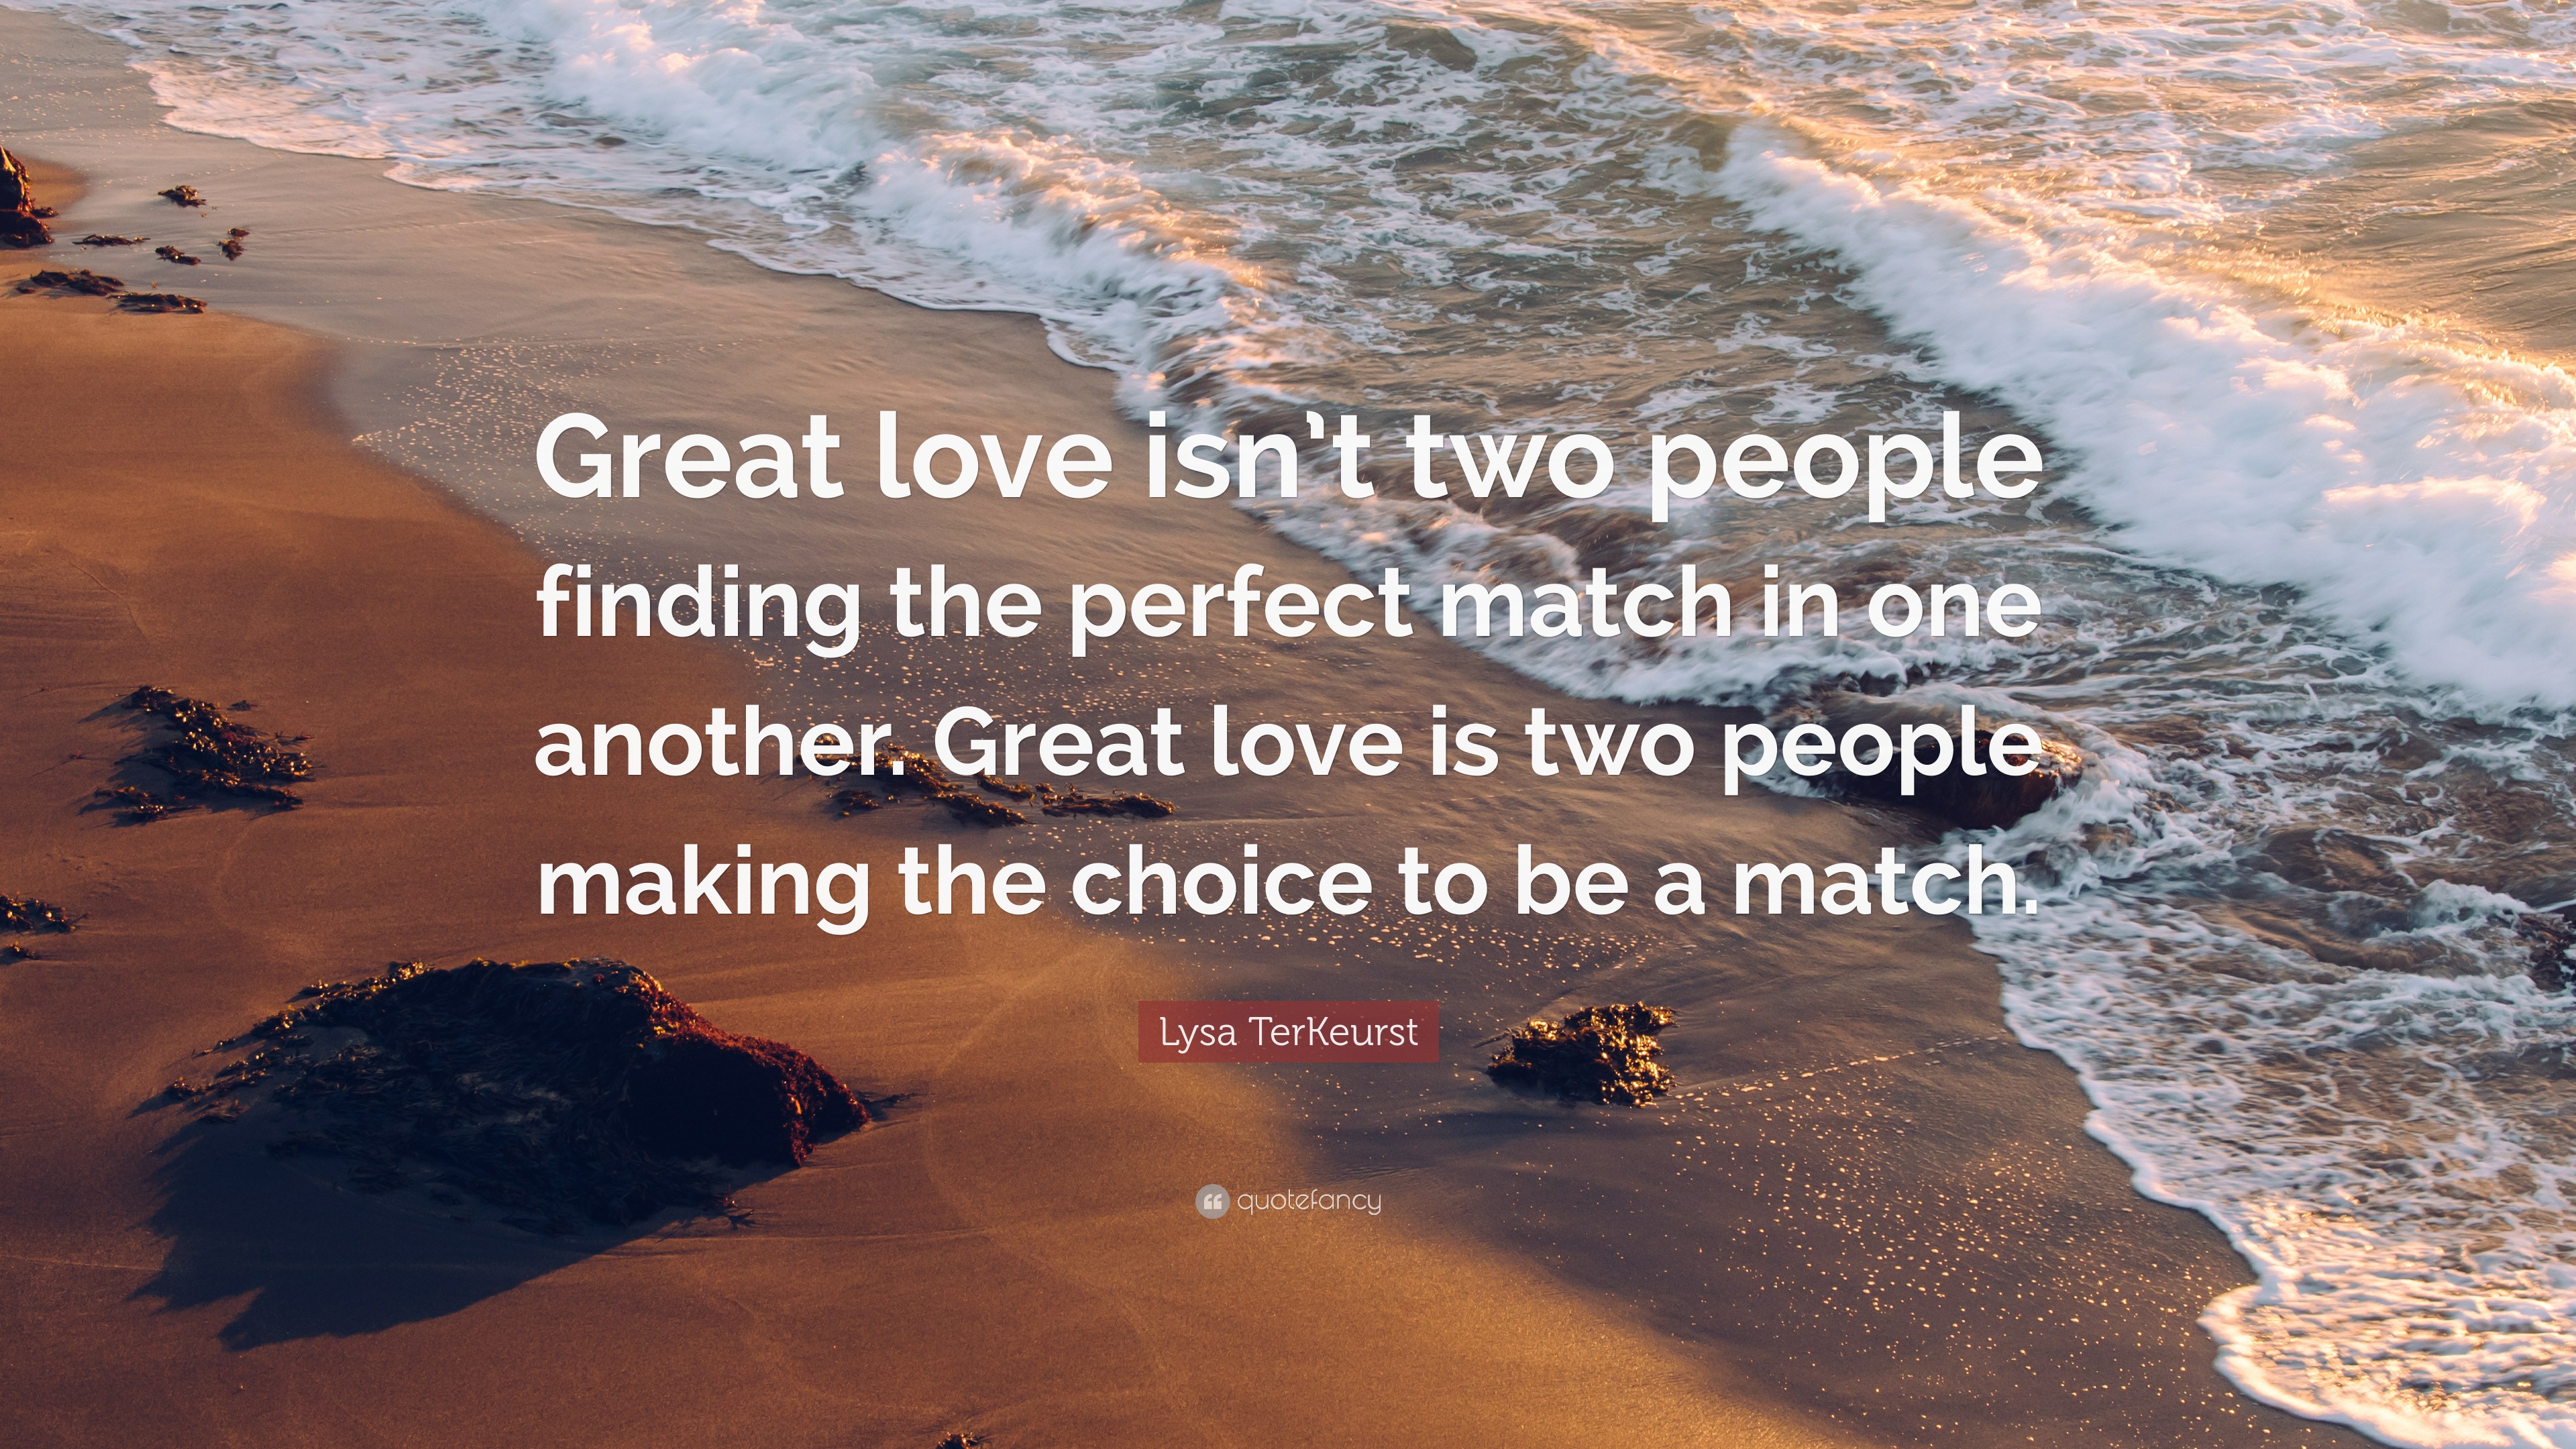 Lysa TerKeurst Quote: “Great love isn't two people finding the perfect  match in one another. Great love is two people making the choice to be a”